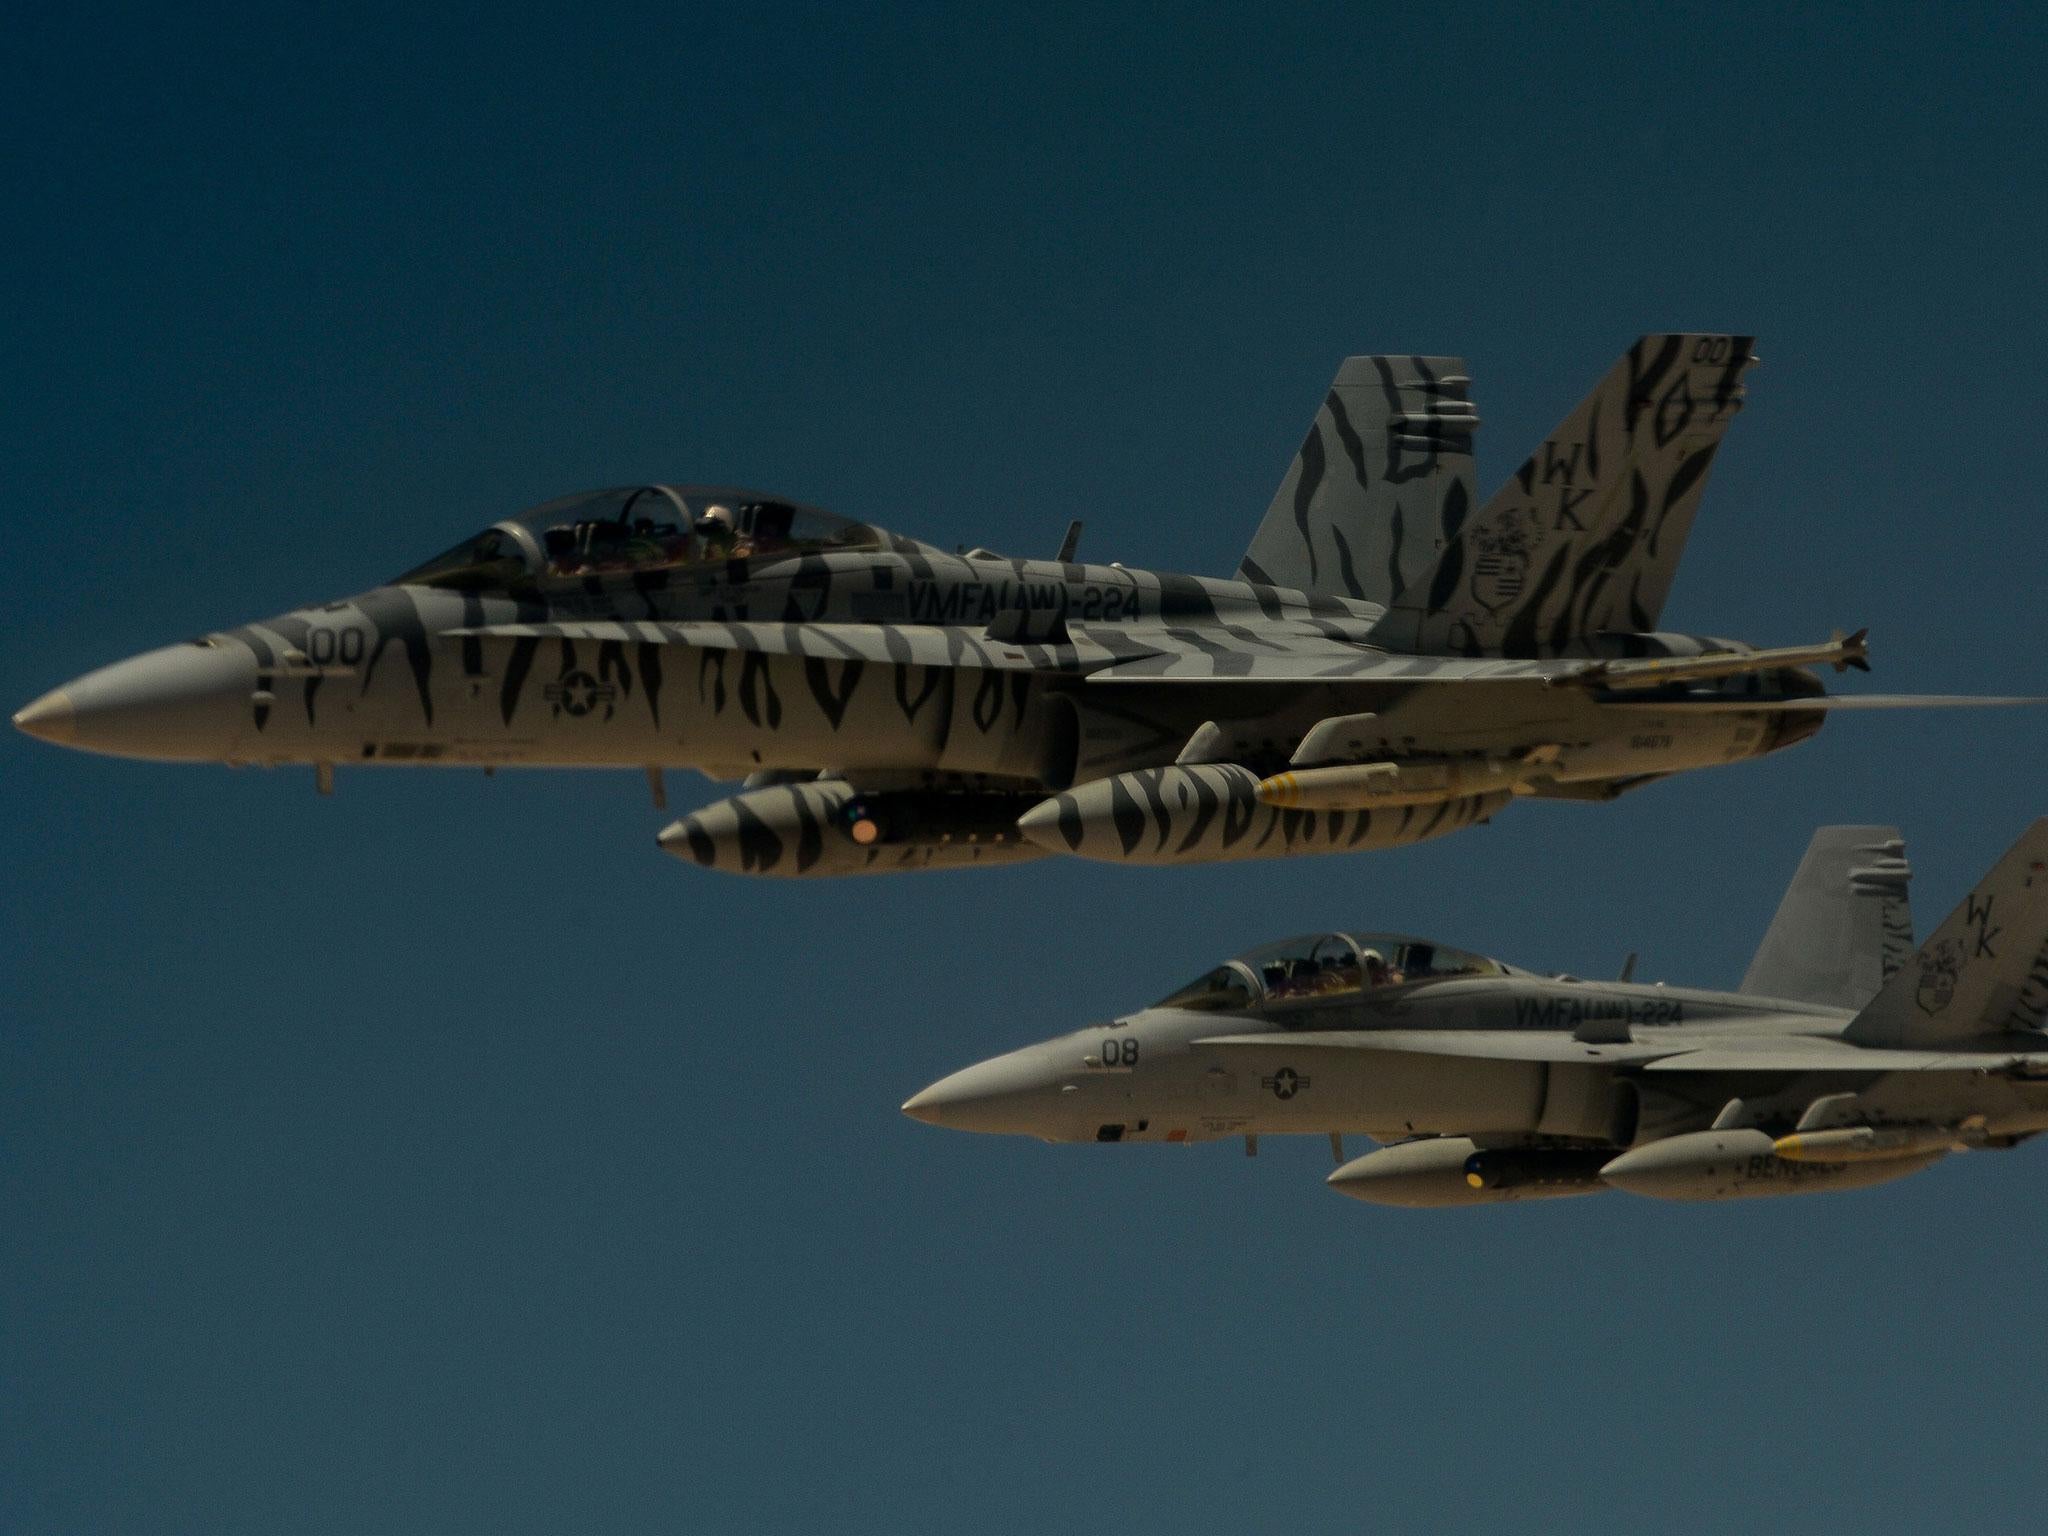 Warning: Moscow believes US jets such as these F18s are in breach of international law in engaging Syrian targets